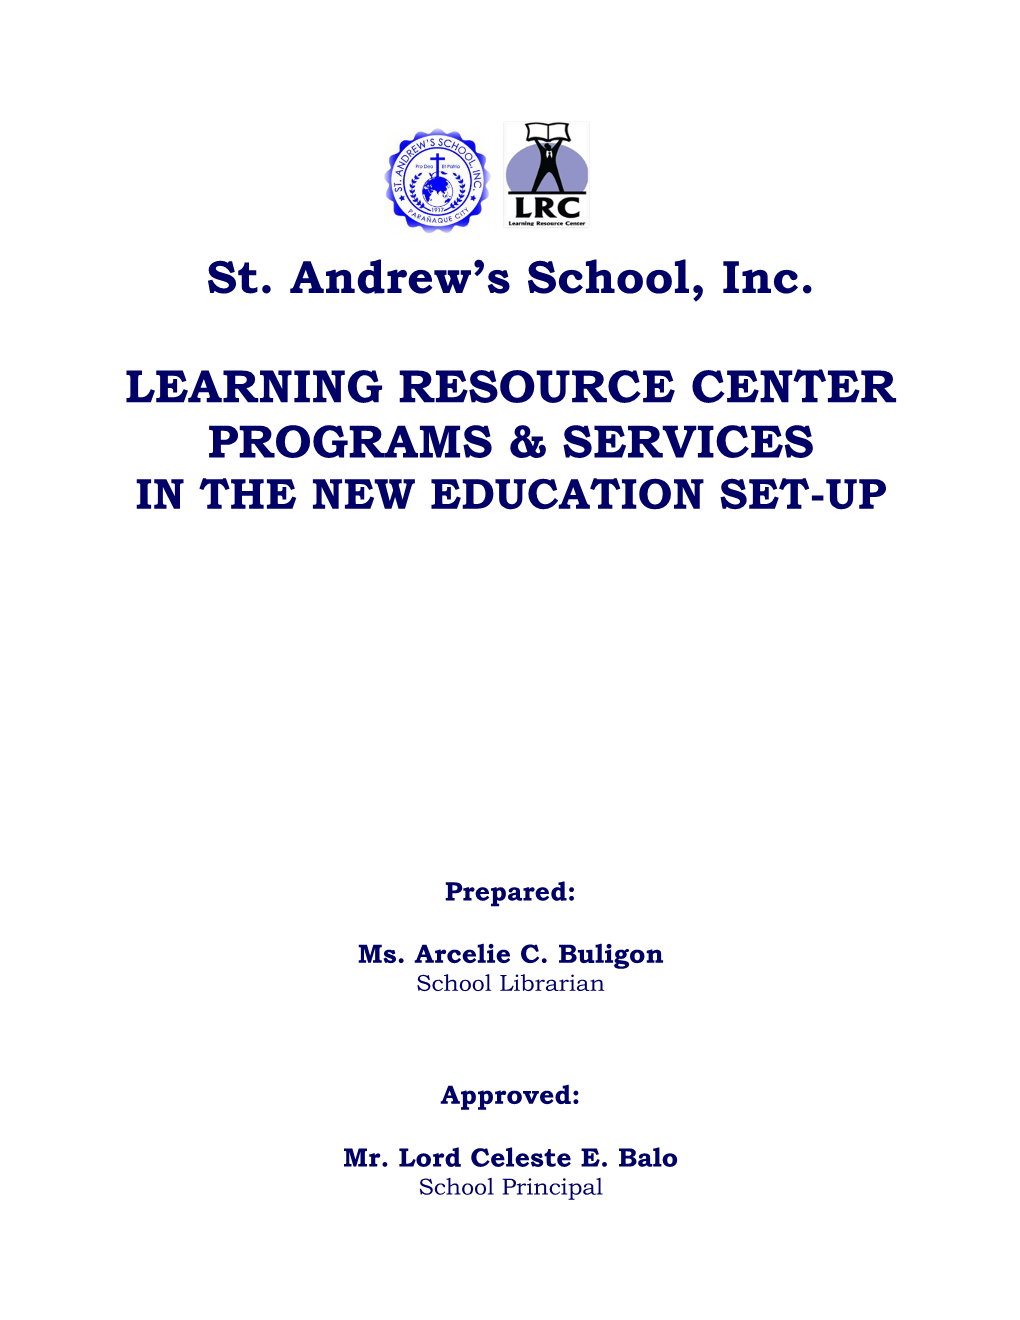 Learning Resource Center Programs & Services in the New Education Set-Up